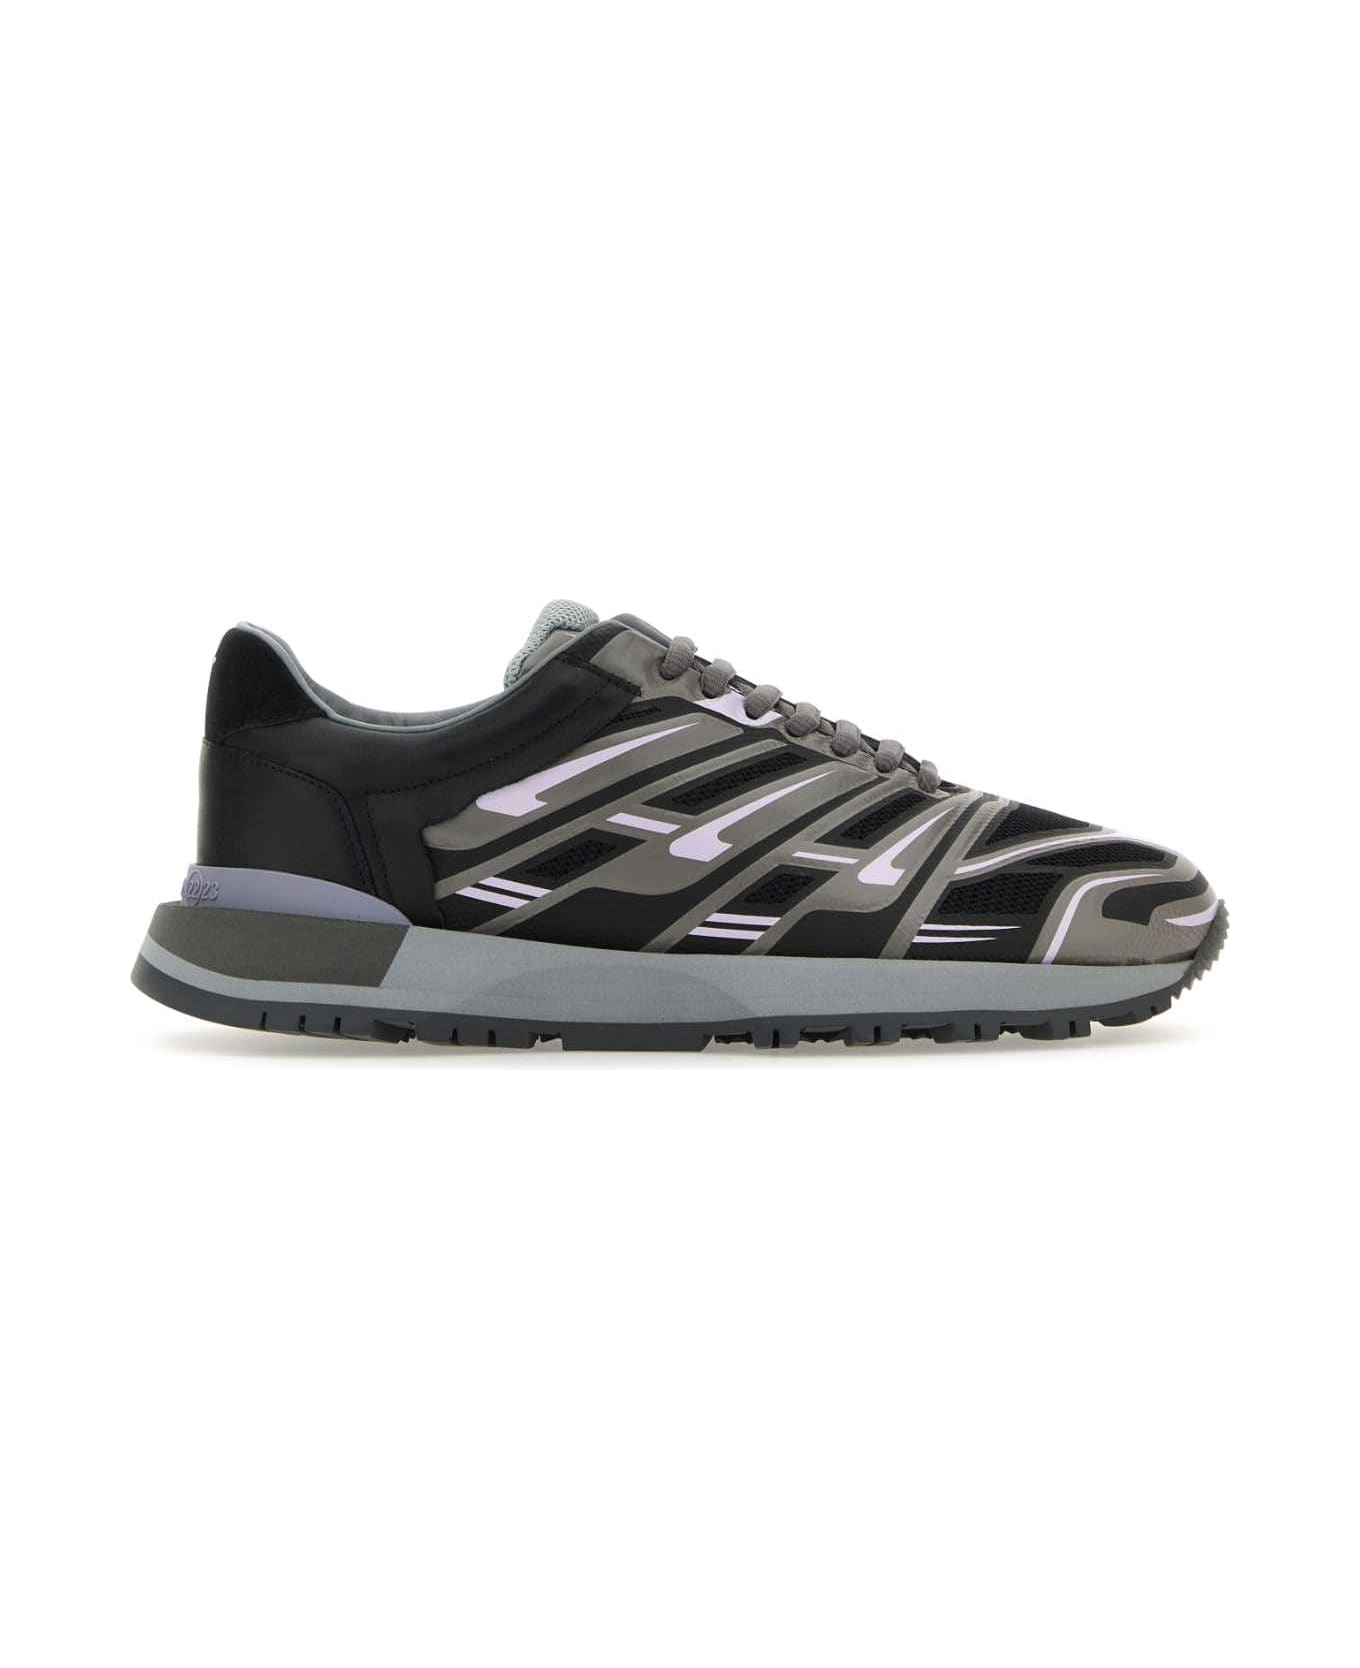 Maison Margiela Multicolor Mesh And Rubber 50-50 Sneakers - GREYMIX